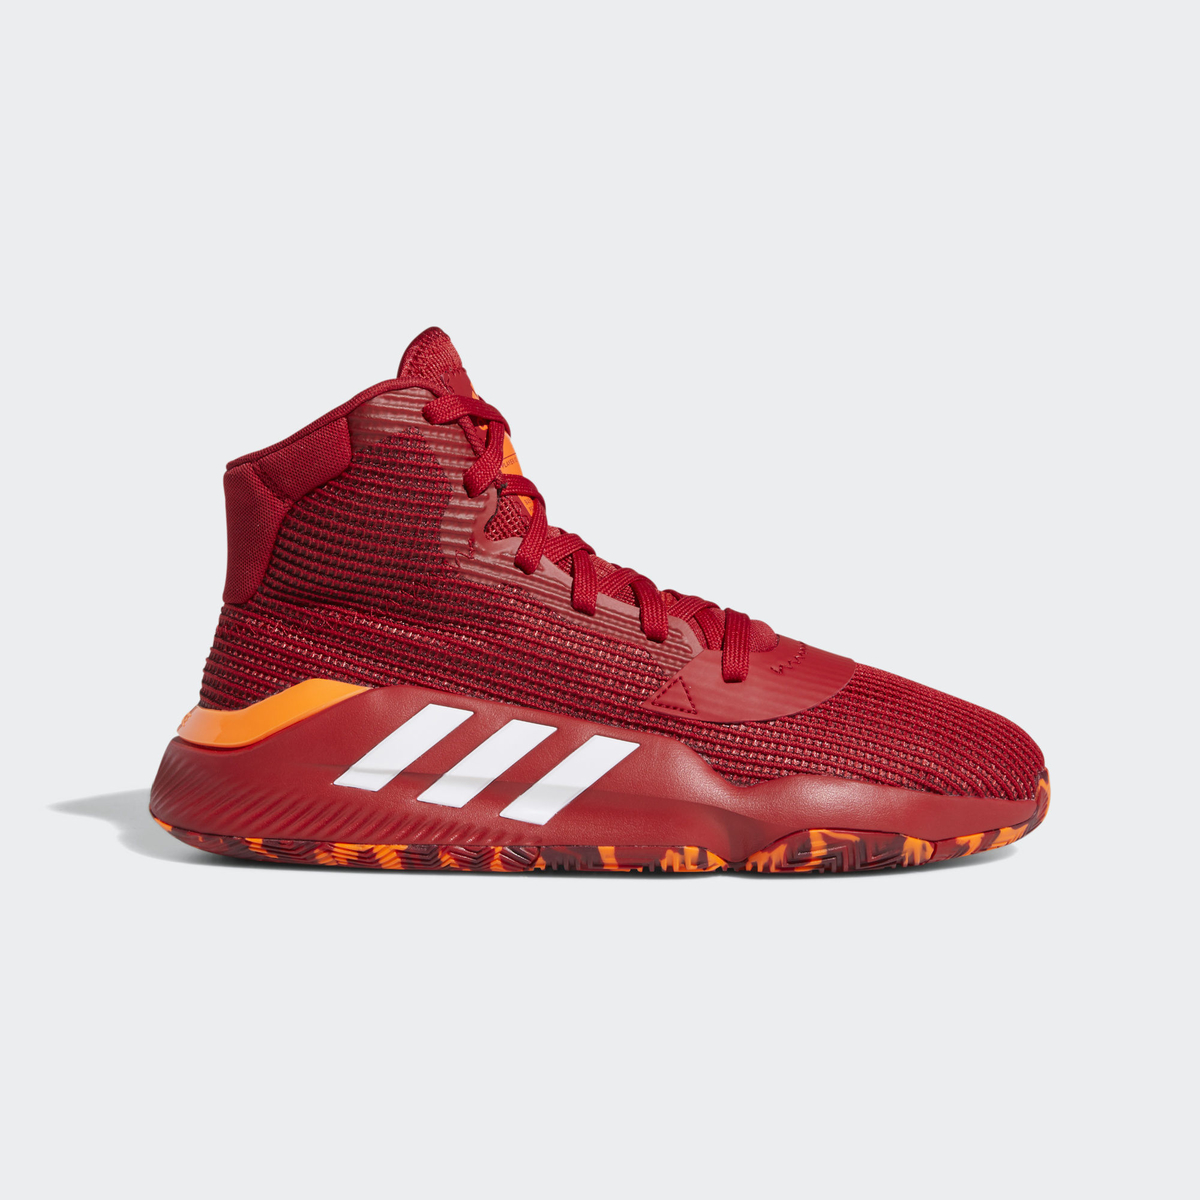 adidas pro bounce weartesters